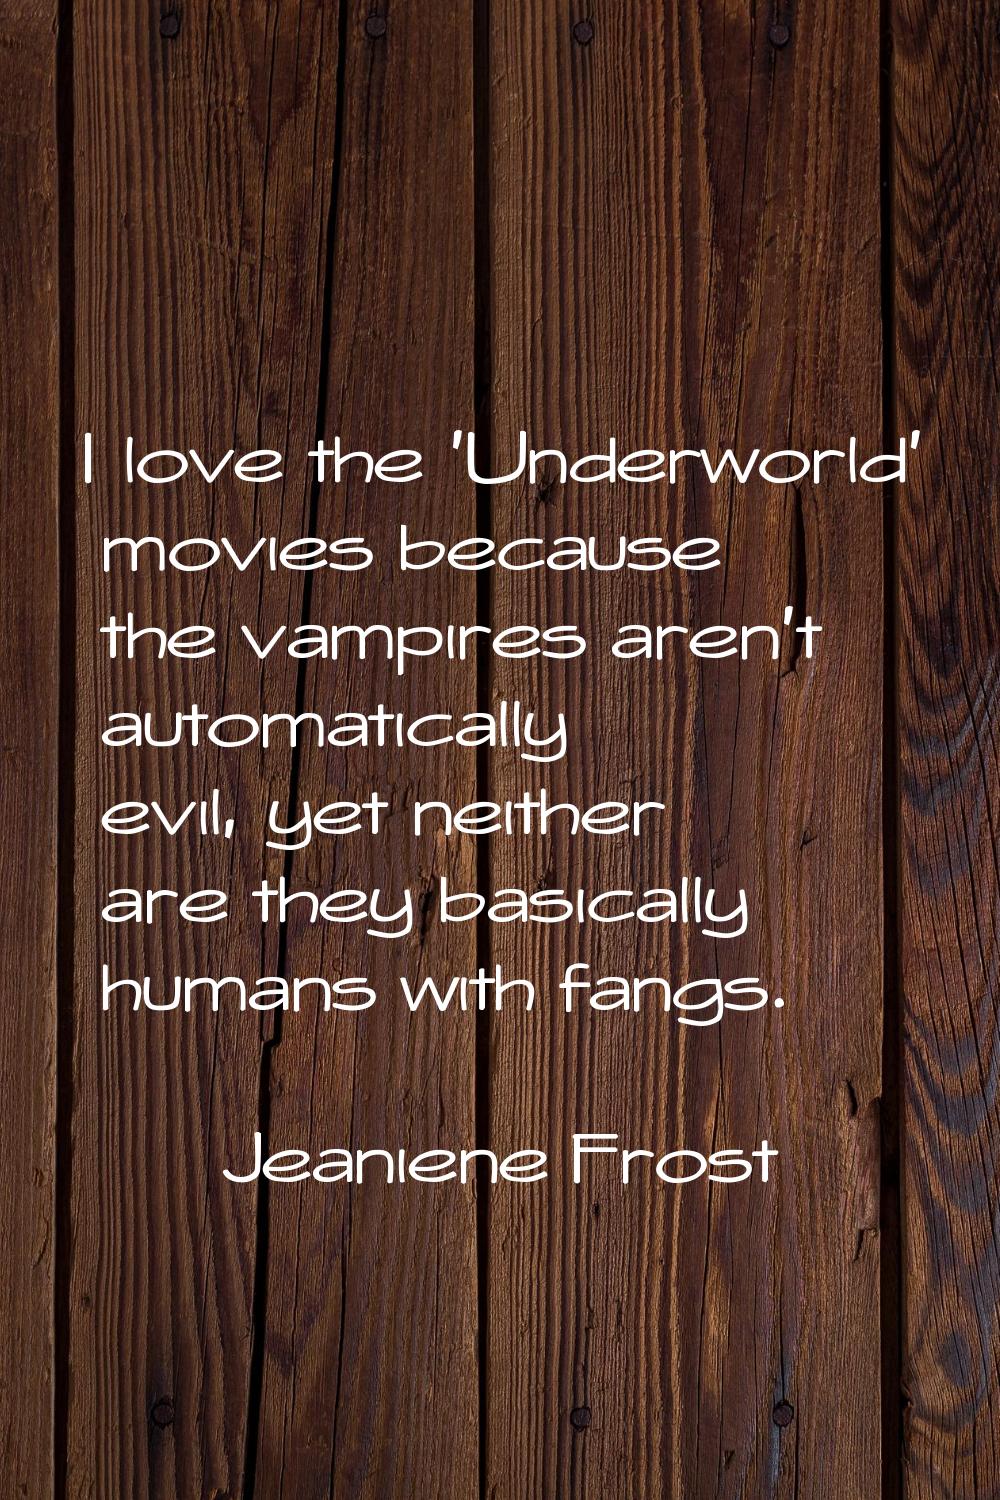 I love the 'Underworld' movies because the vampires aren't automatically evil, yet neither are they